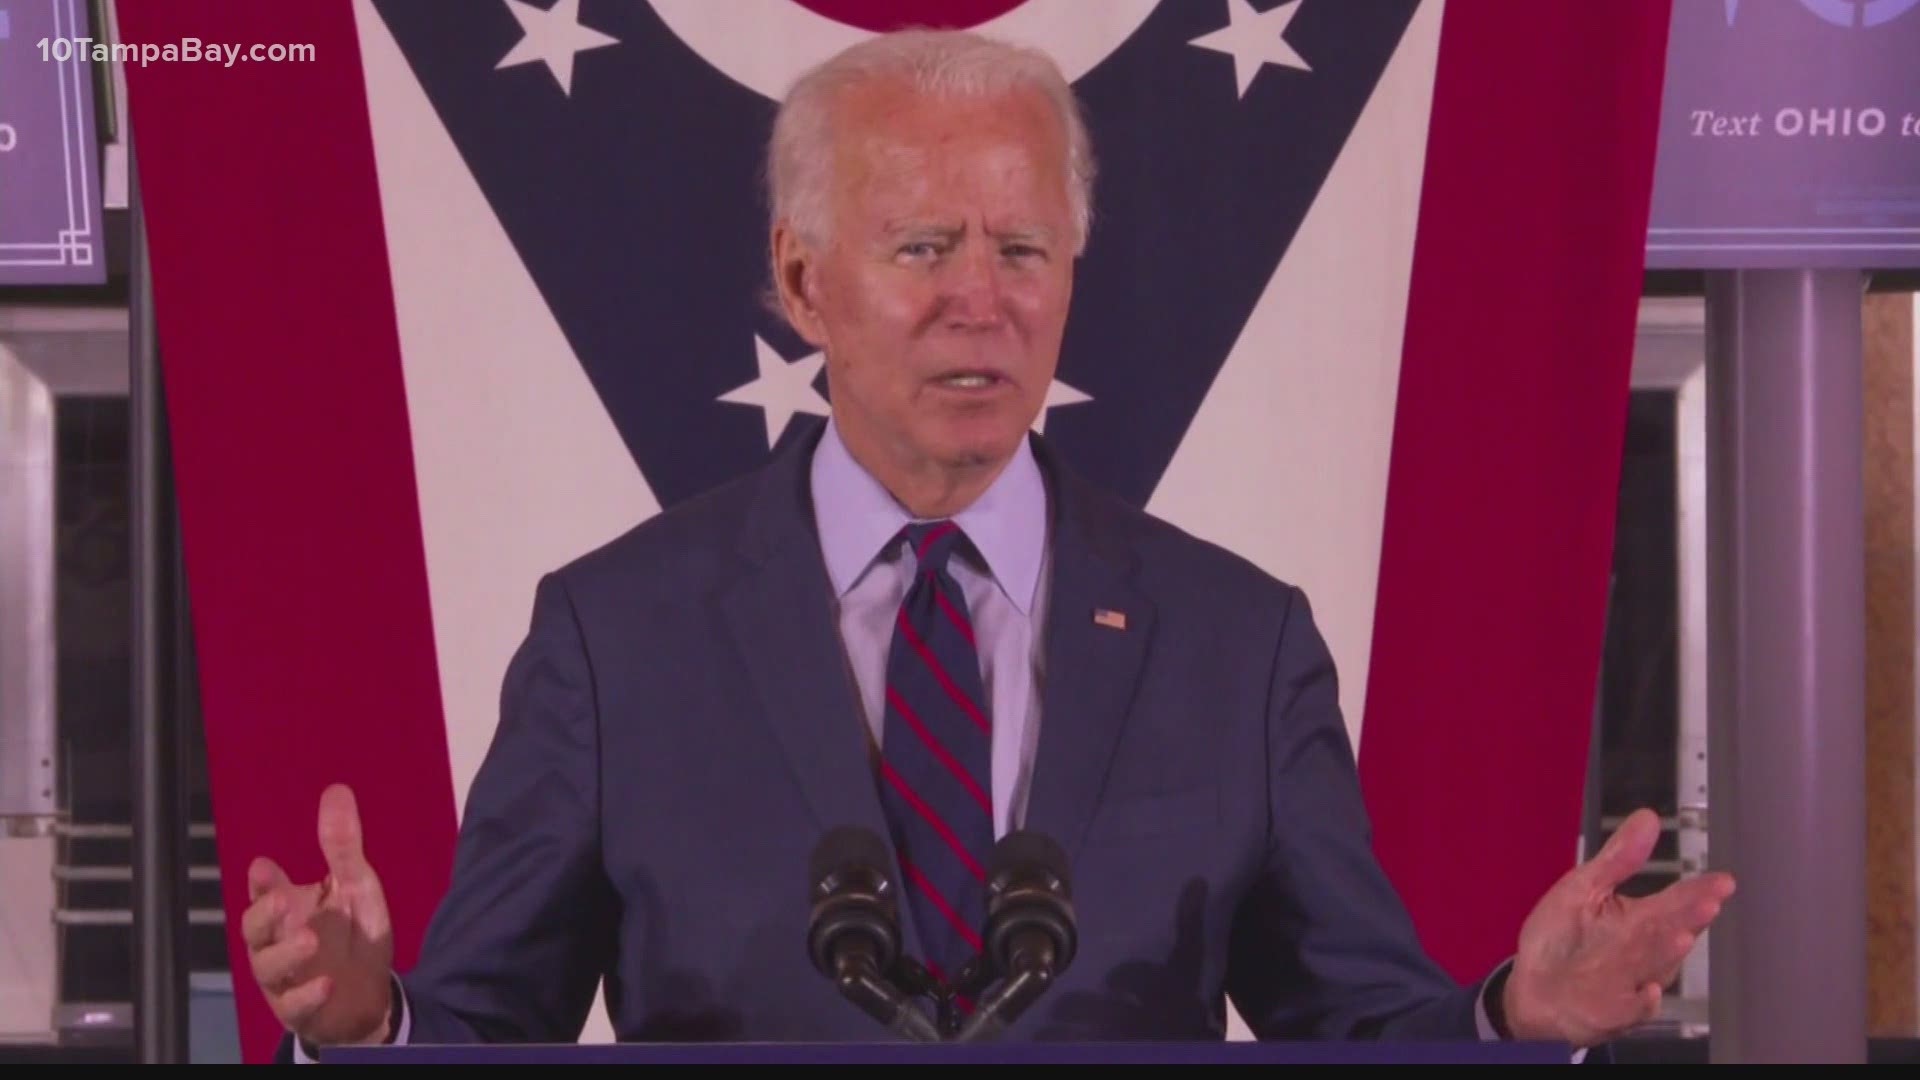 The Democratic presidential nominee's press campaign says Biden will be in the state Tuesday, Oct. 13, with stops in Pembroke Pines and Miramar.